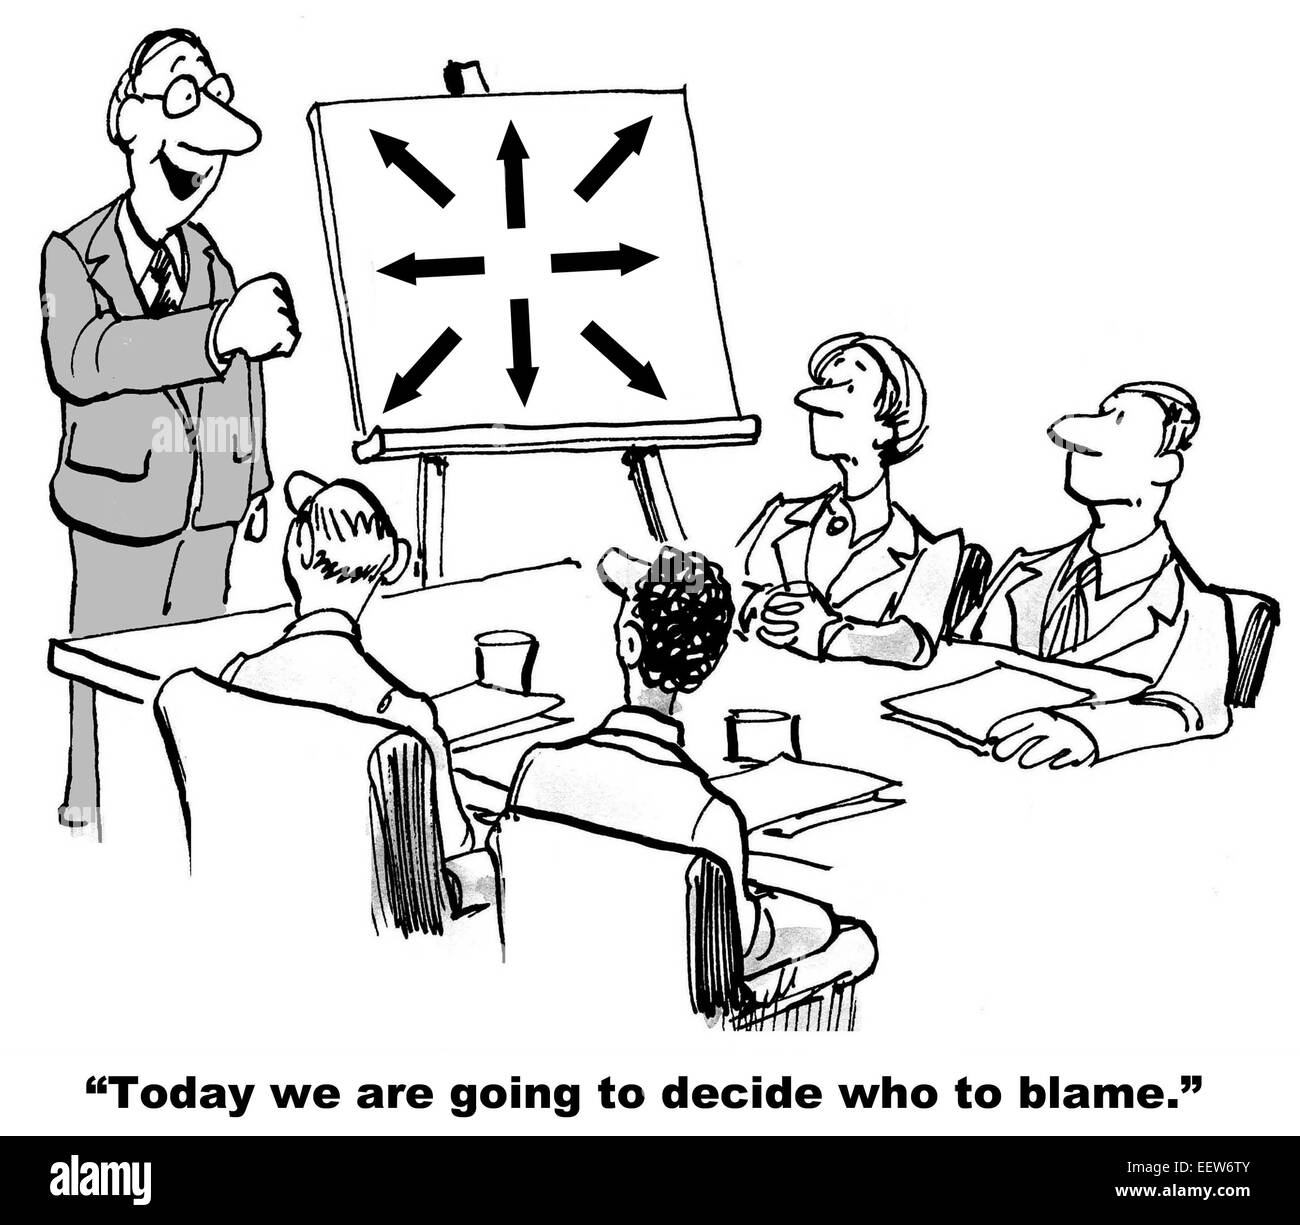 Cartoon of businesspeople in a meeting with boss who is saying today we are going to decide who to blame. Stock Photo